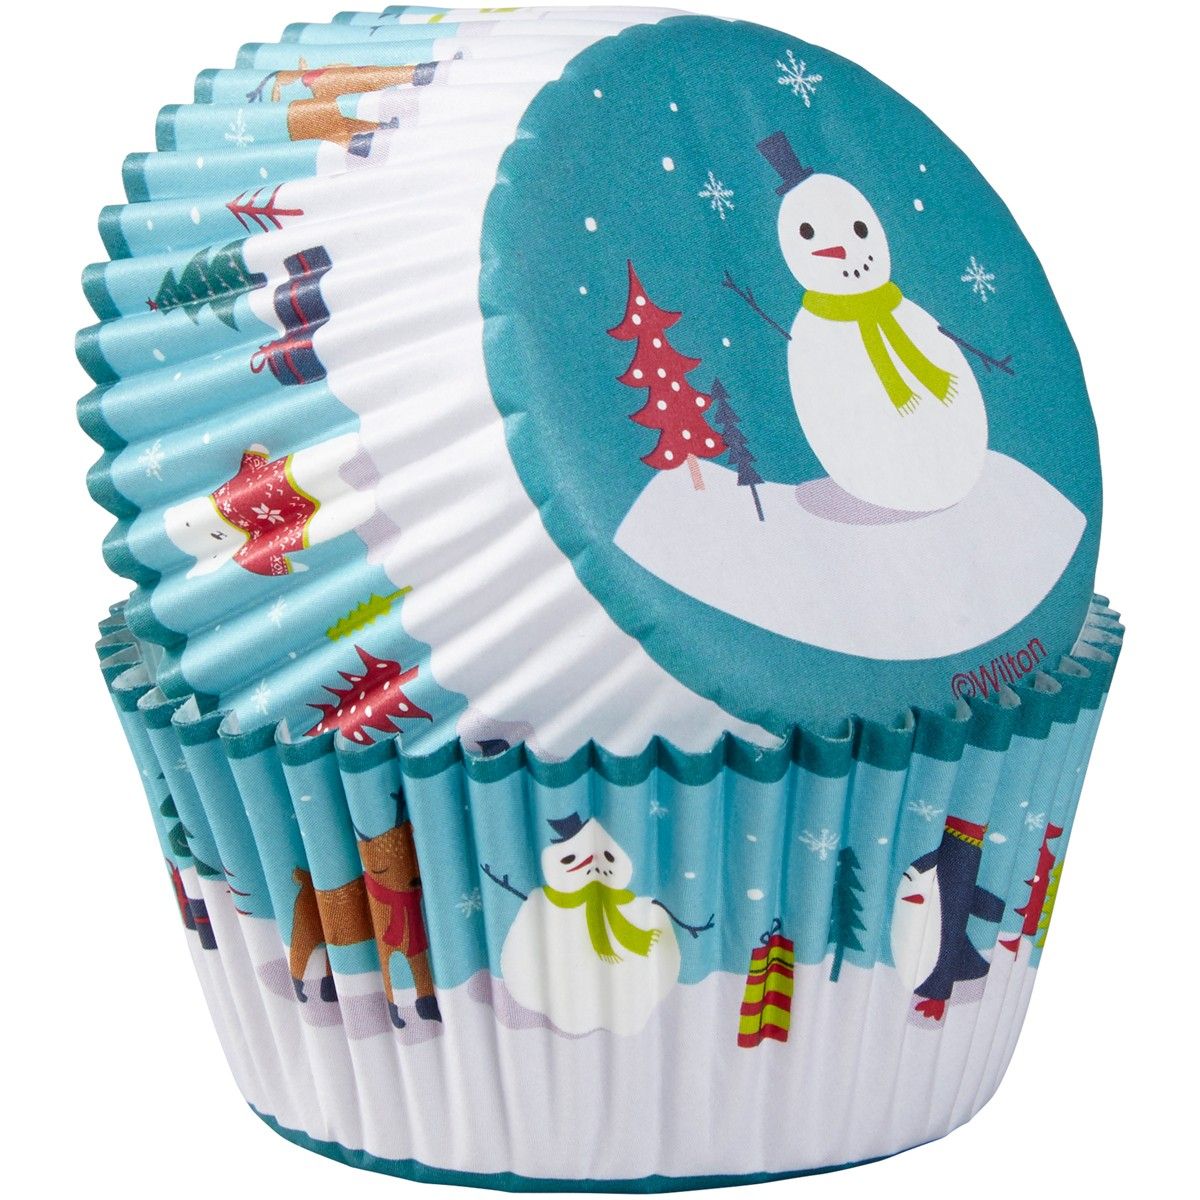 Wilton Baking Cups Snowman with Characters pk/75